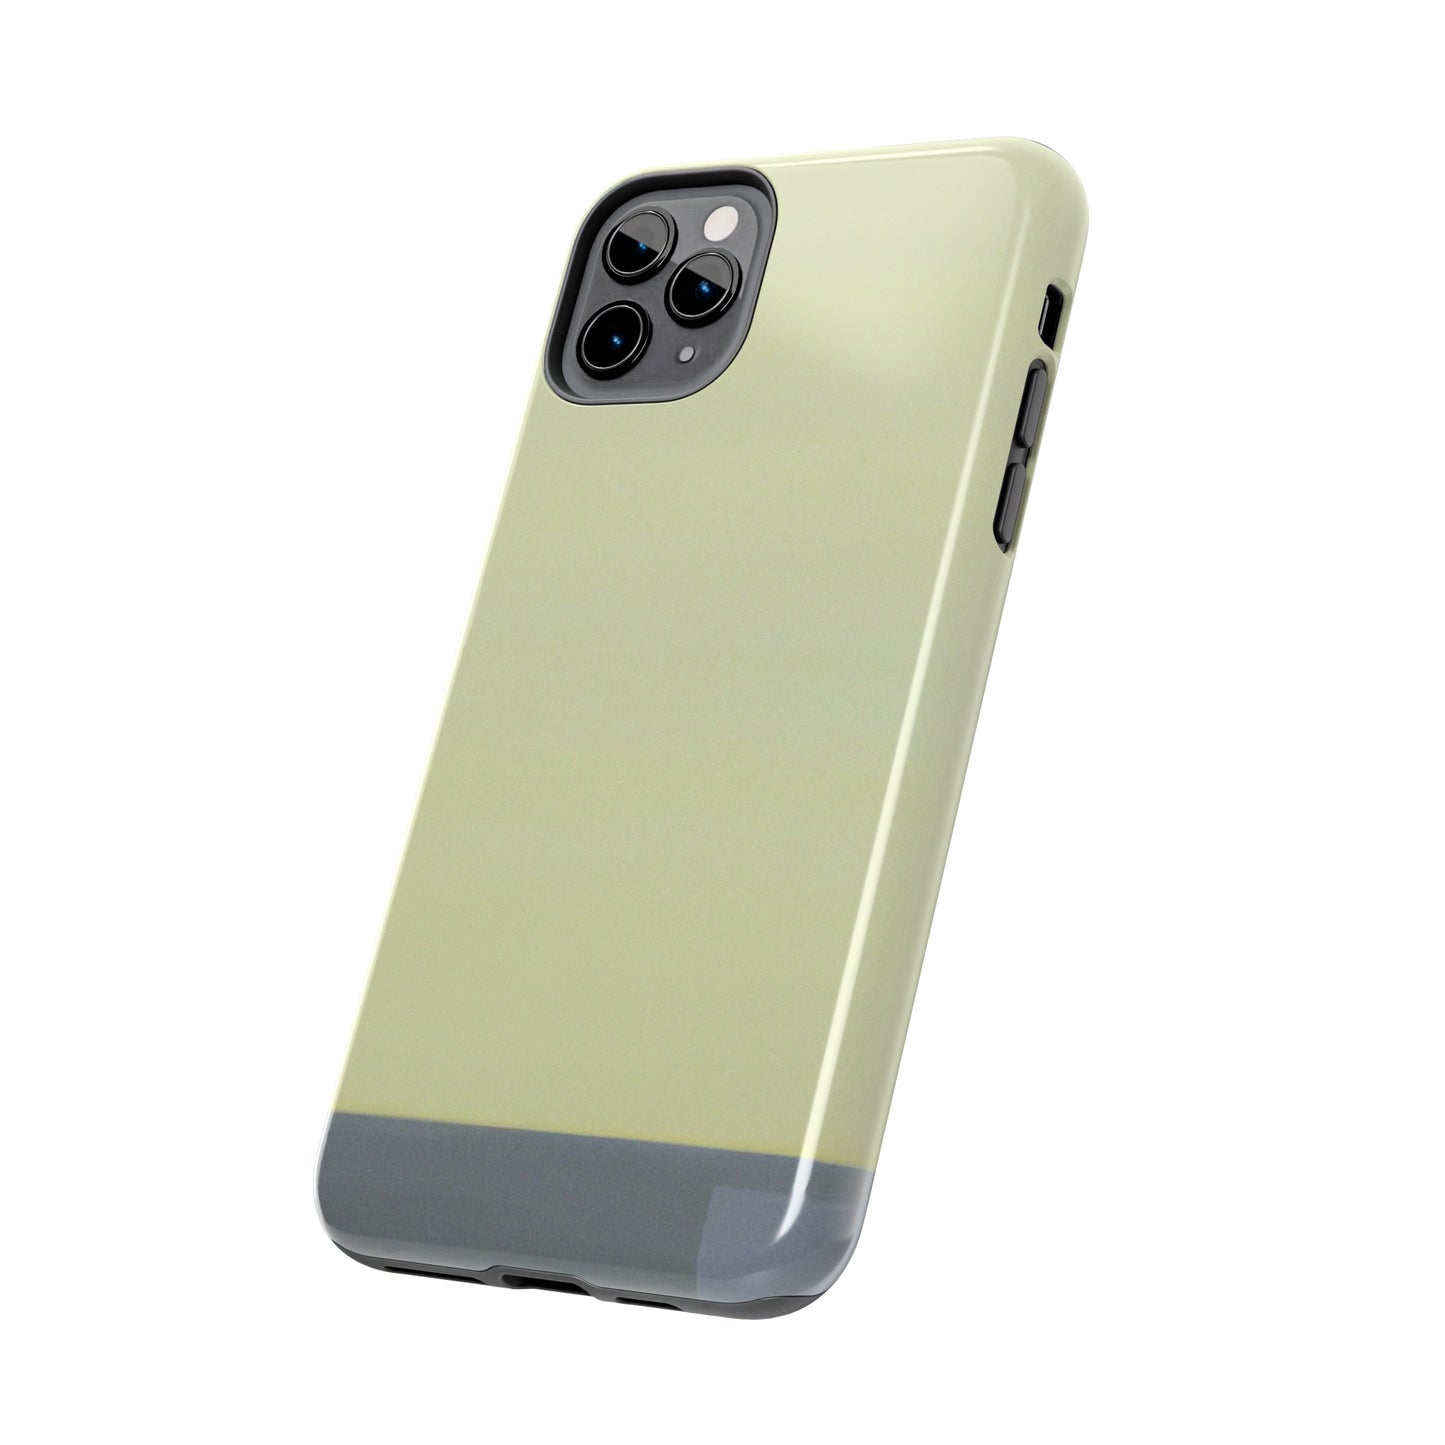 Strong Apple iPhone Case Ft. Minimal Gray Grey